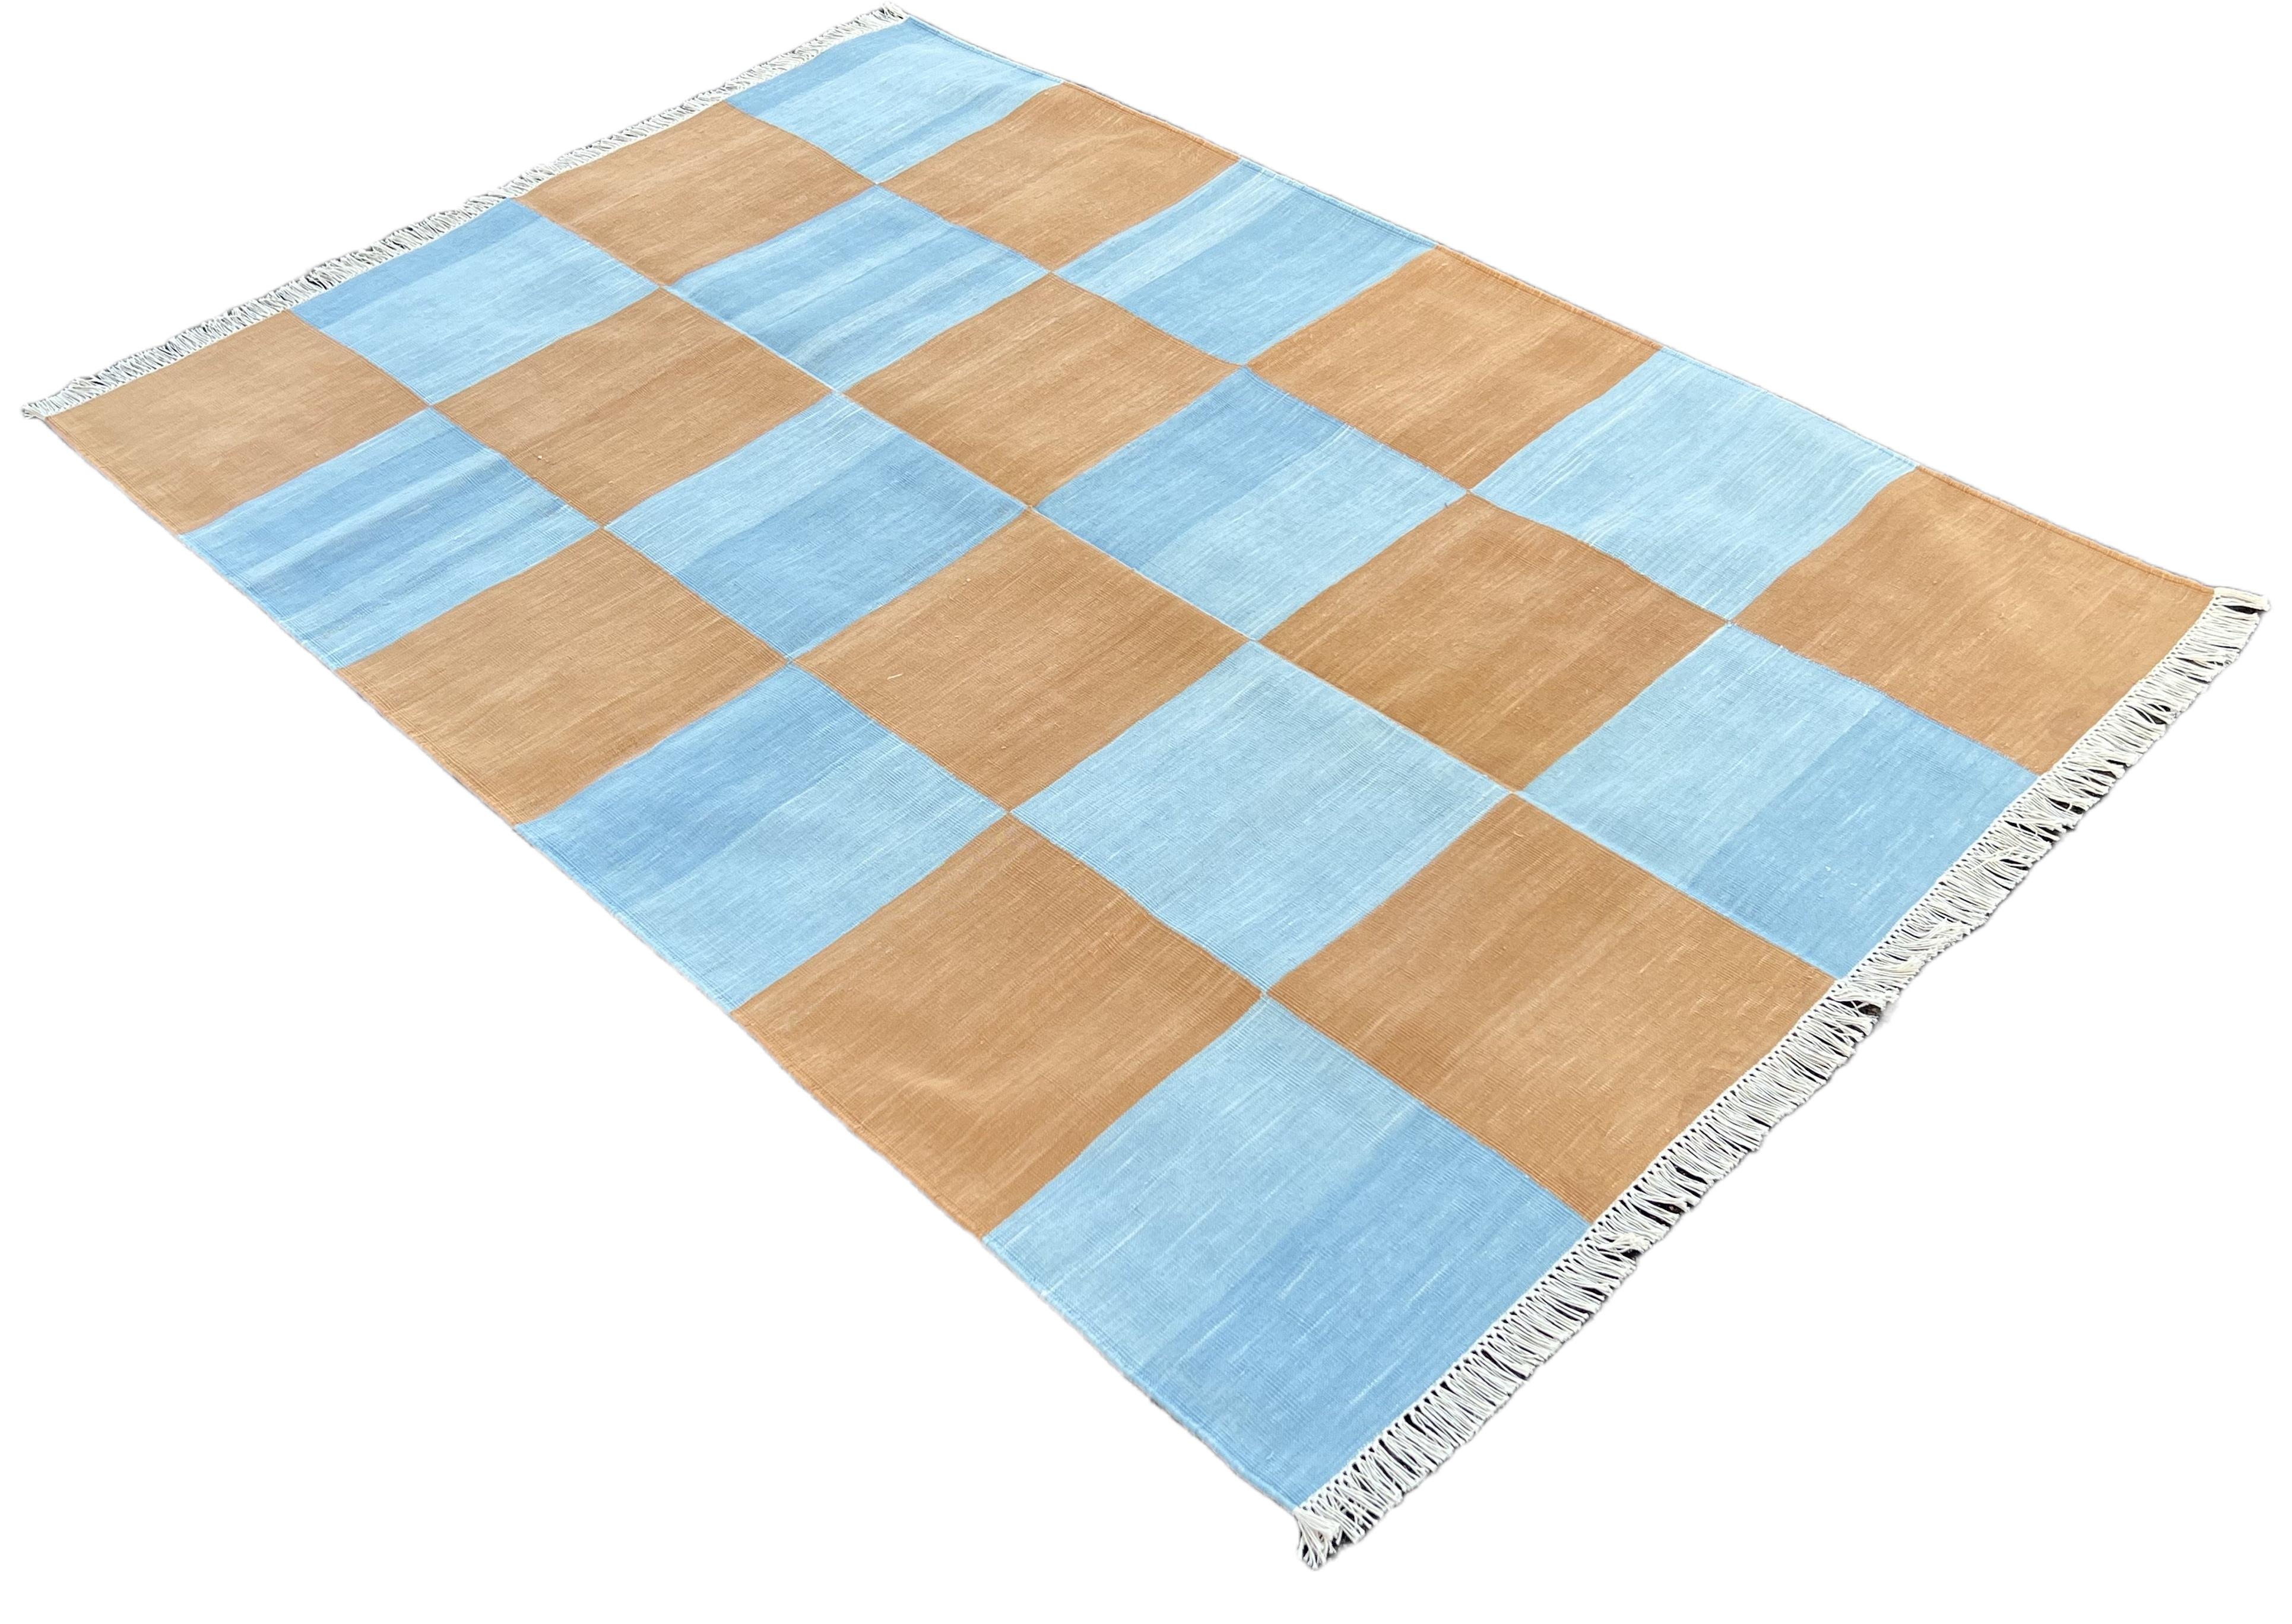 Cotton Vegetable Dyed Tan And Blue Checked Indian Dhurrie Rug-4'x6' 

These special flat-weave dhurries are hand-woven with 15 ply 100% cotton yarn. Due to the special manufacturing techniques used to create our rugs, the size and color of each